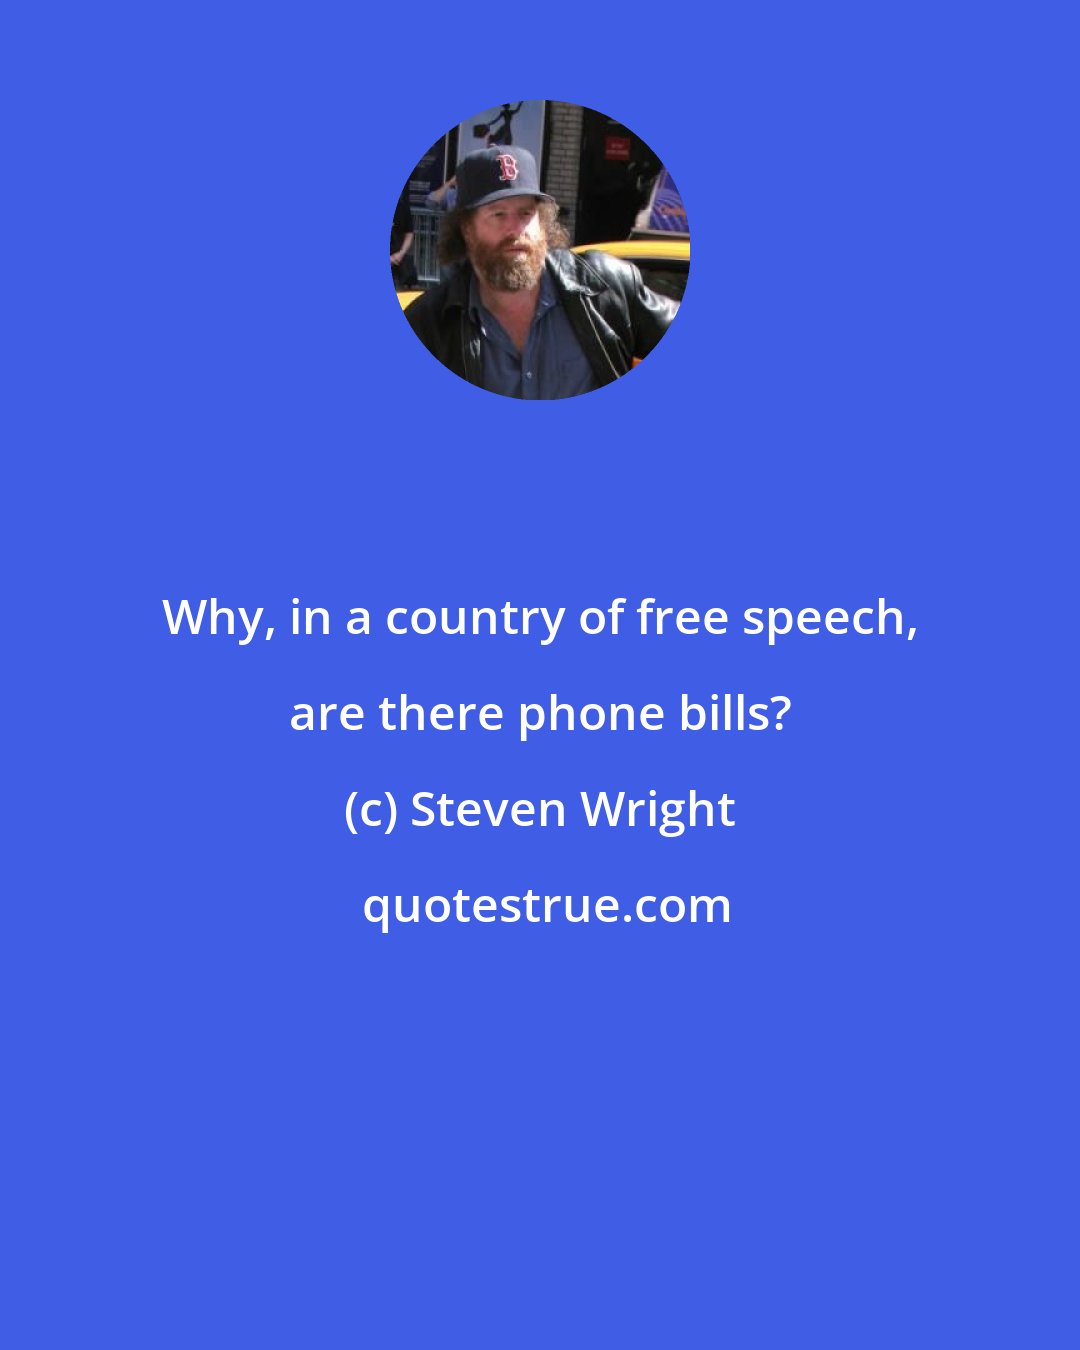 Steven Wright: Why, in a country of free speech, are there phone bills?